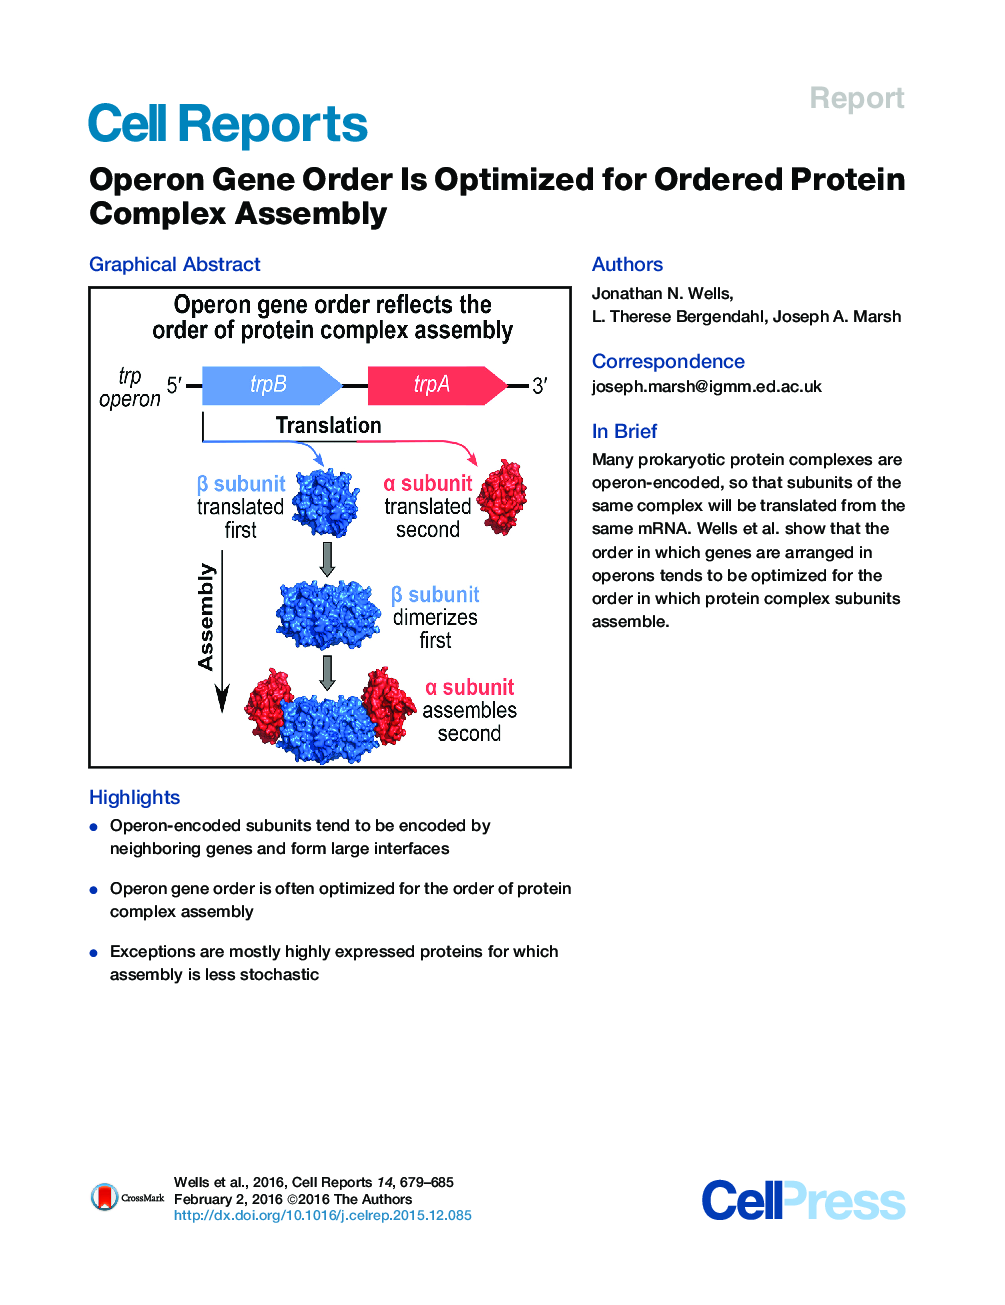 Operon Gene Order Is Optimized for Ordered Protein Complex Assembly 